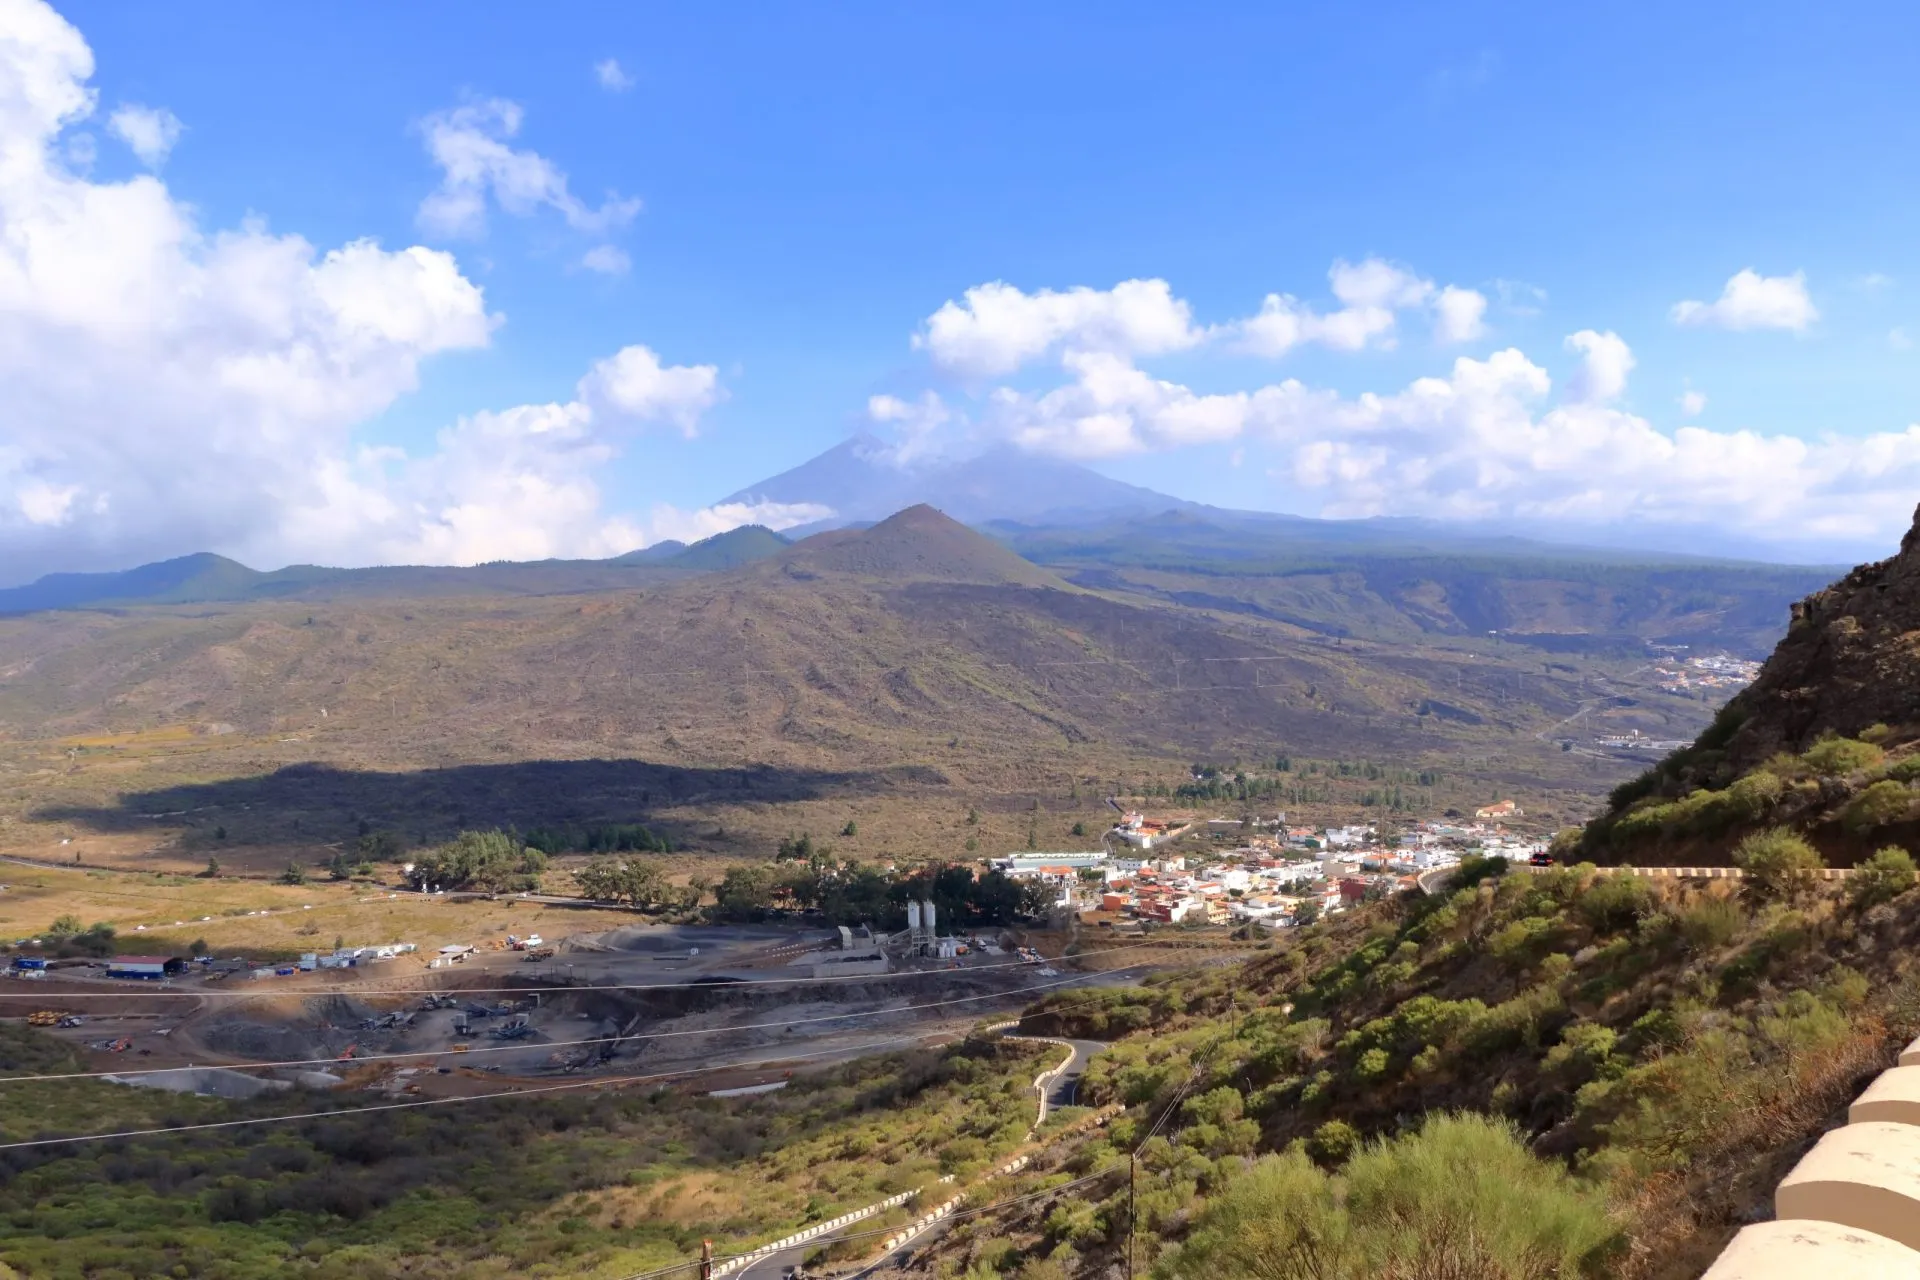 Santiago del Teide town and valle de arriba from above. Tenerife, Canary Islands, Spain